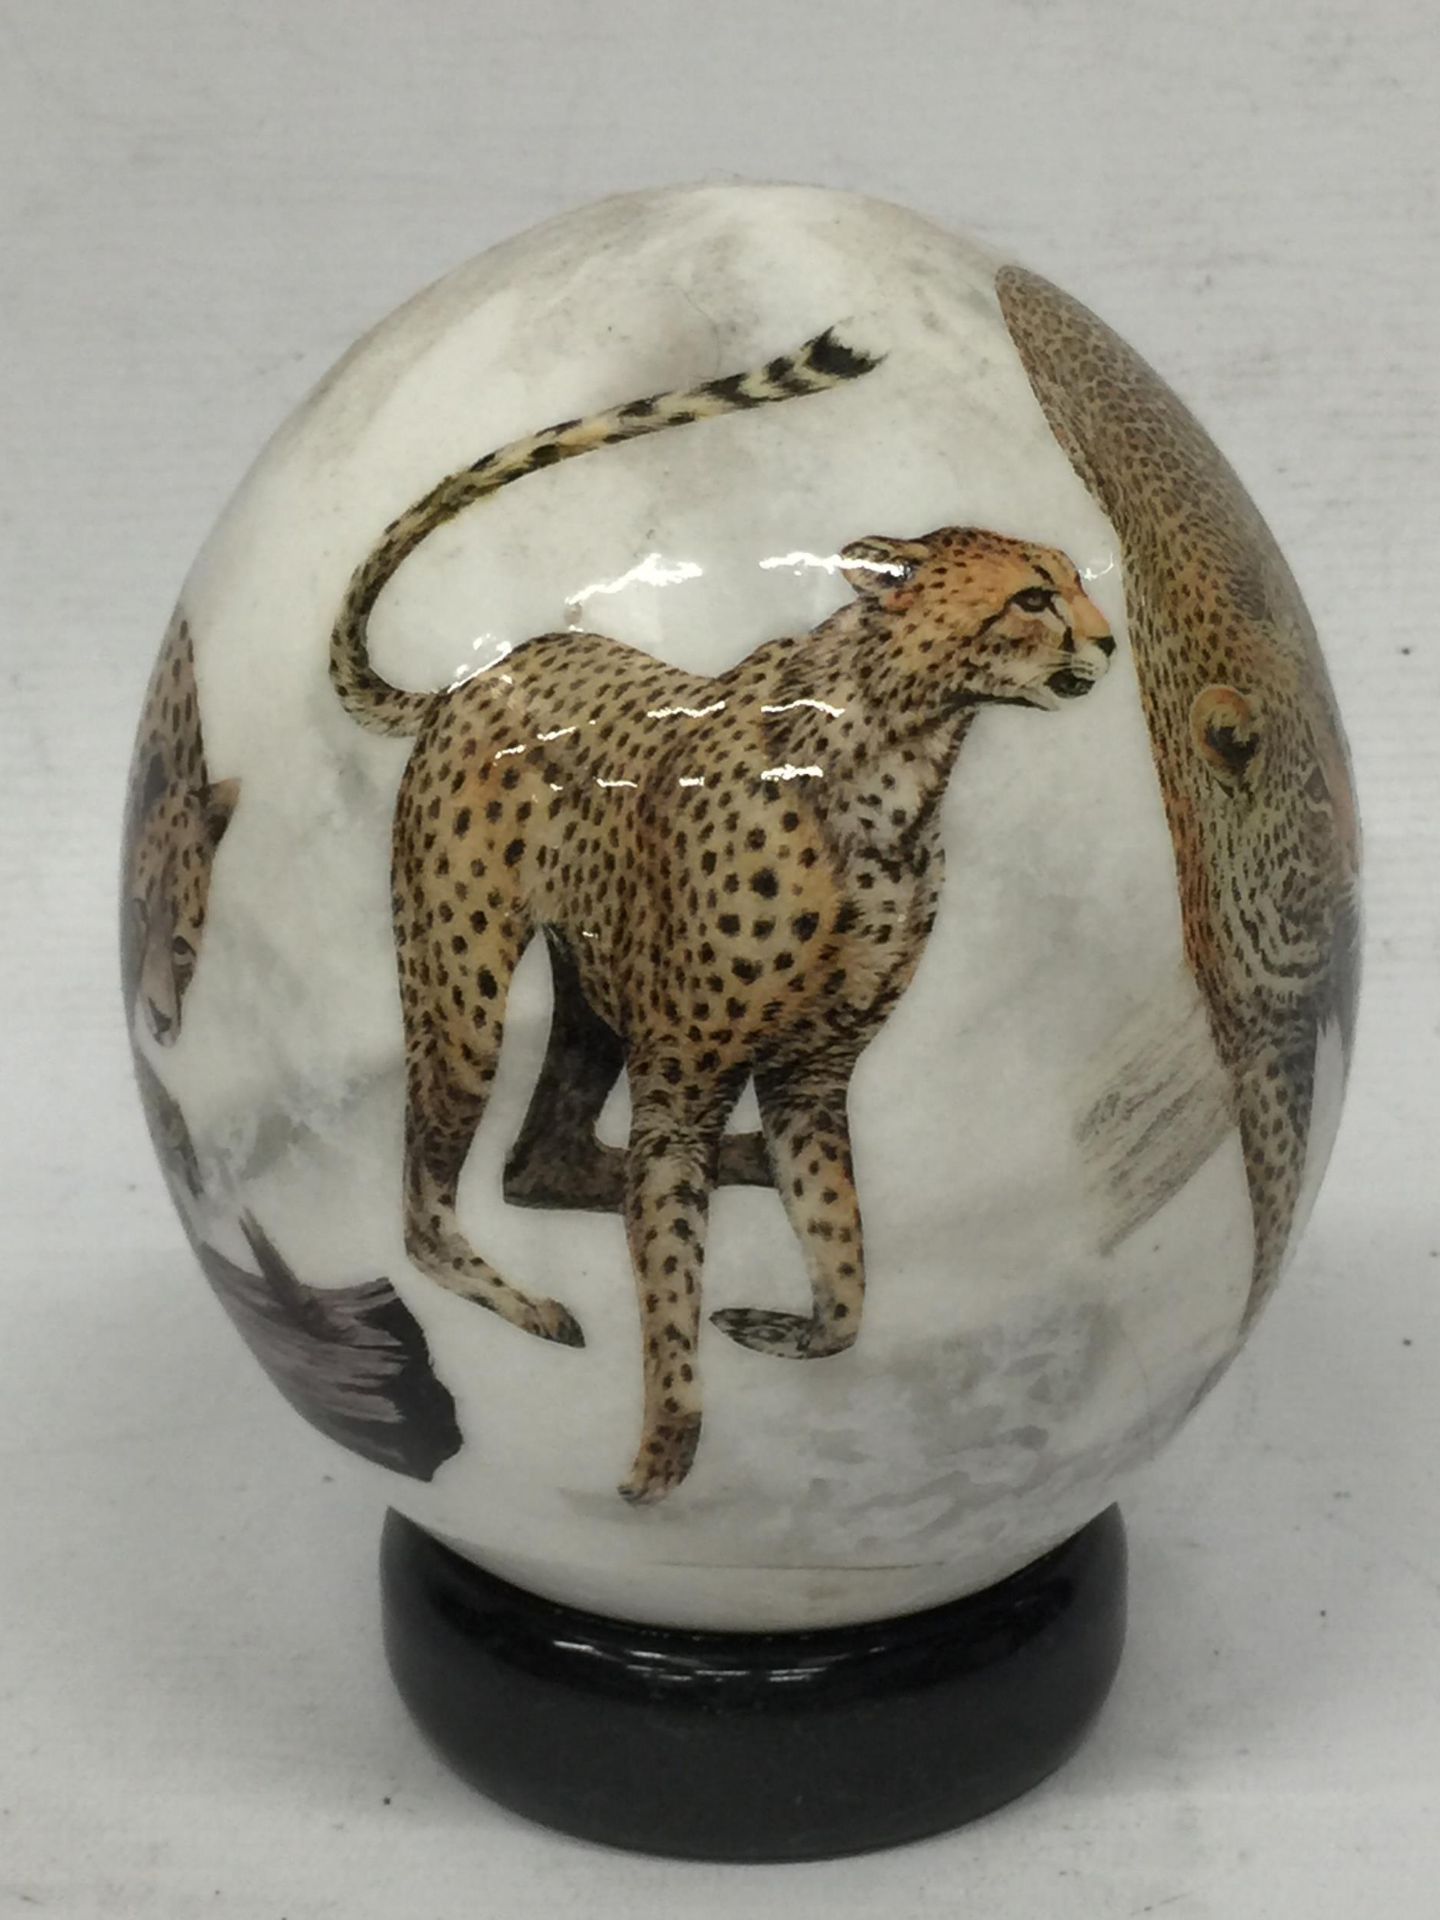 A HAND PAINTED OSTRICH EGG ON STAND WITH CHEETAH DESIGN, INDISTINCTLY SIGNED - Image 4 of 5